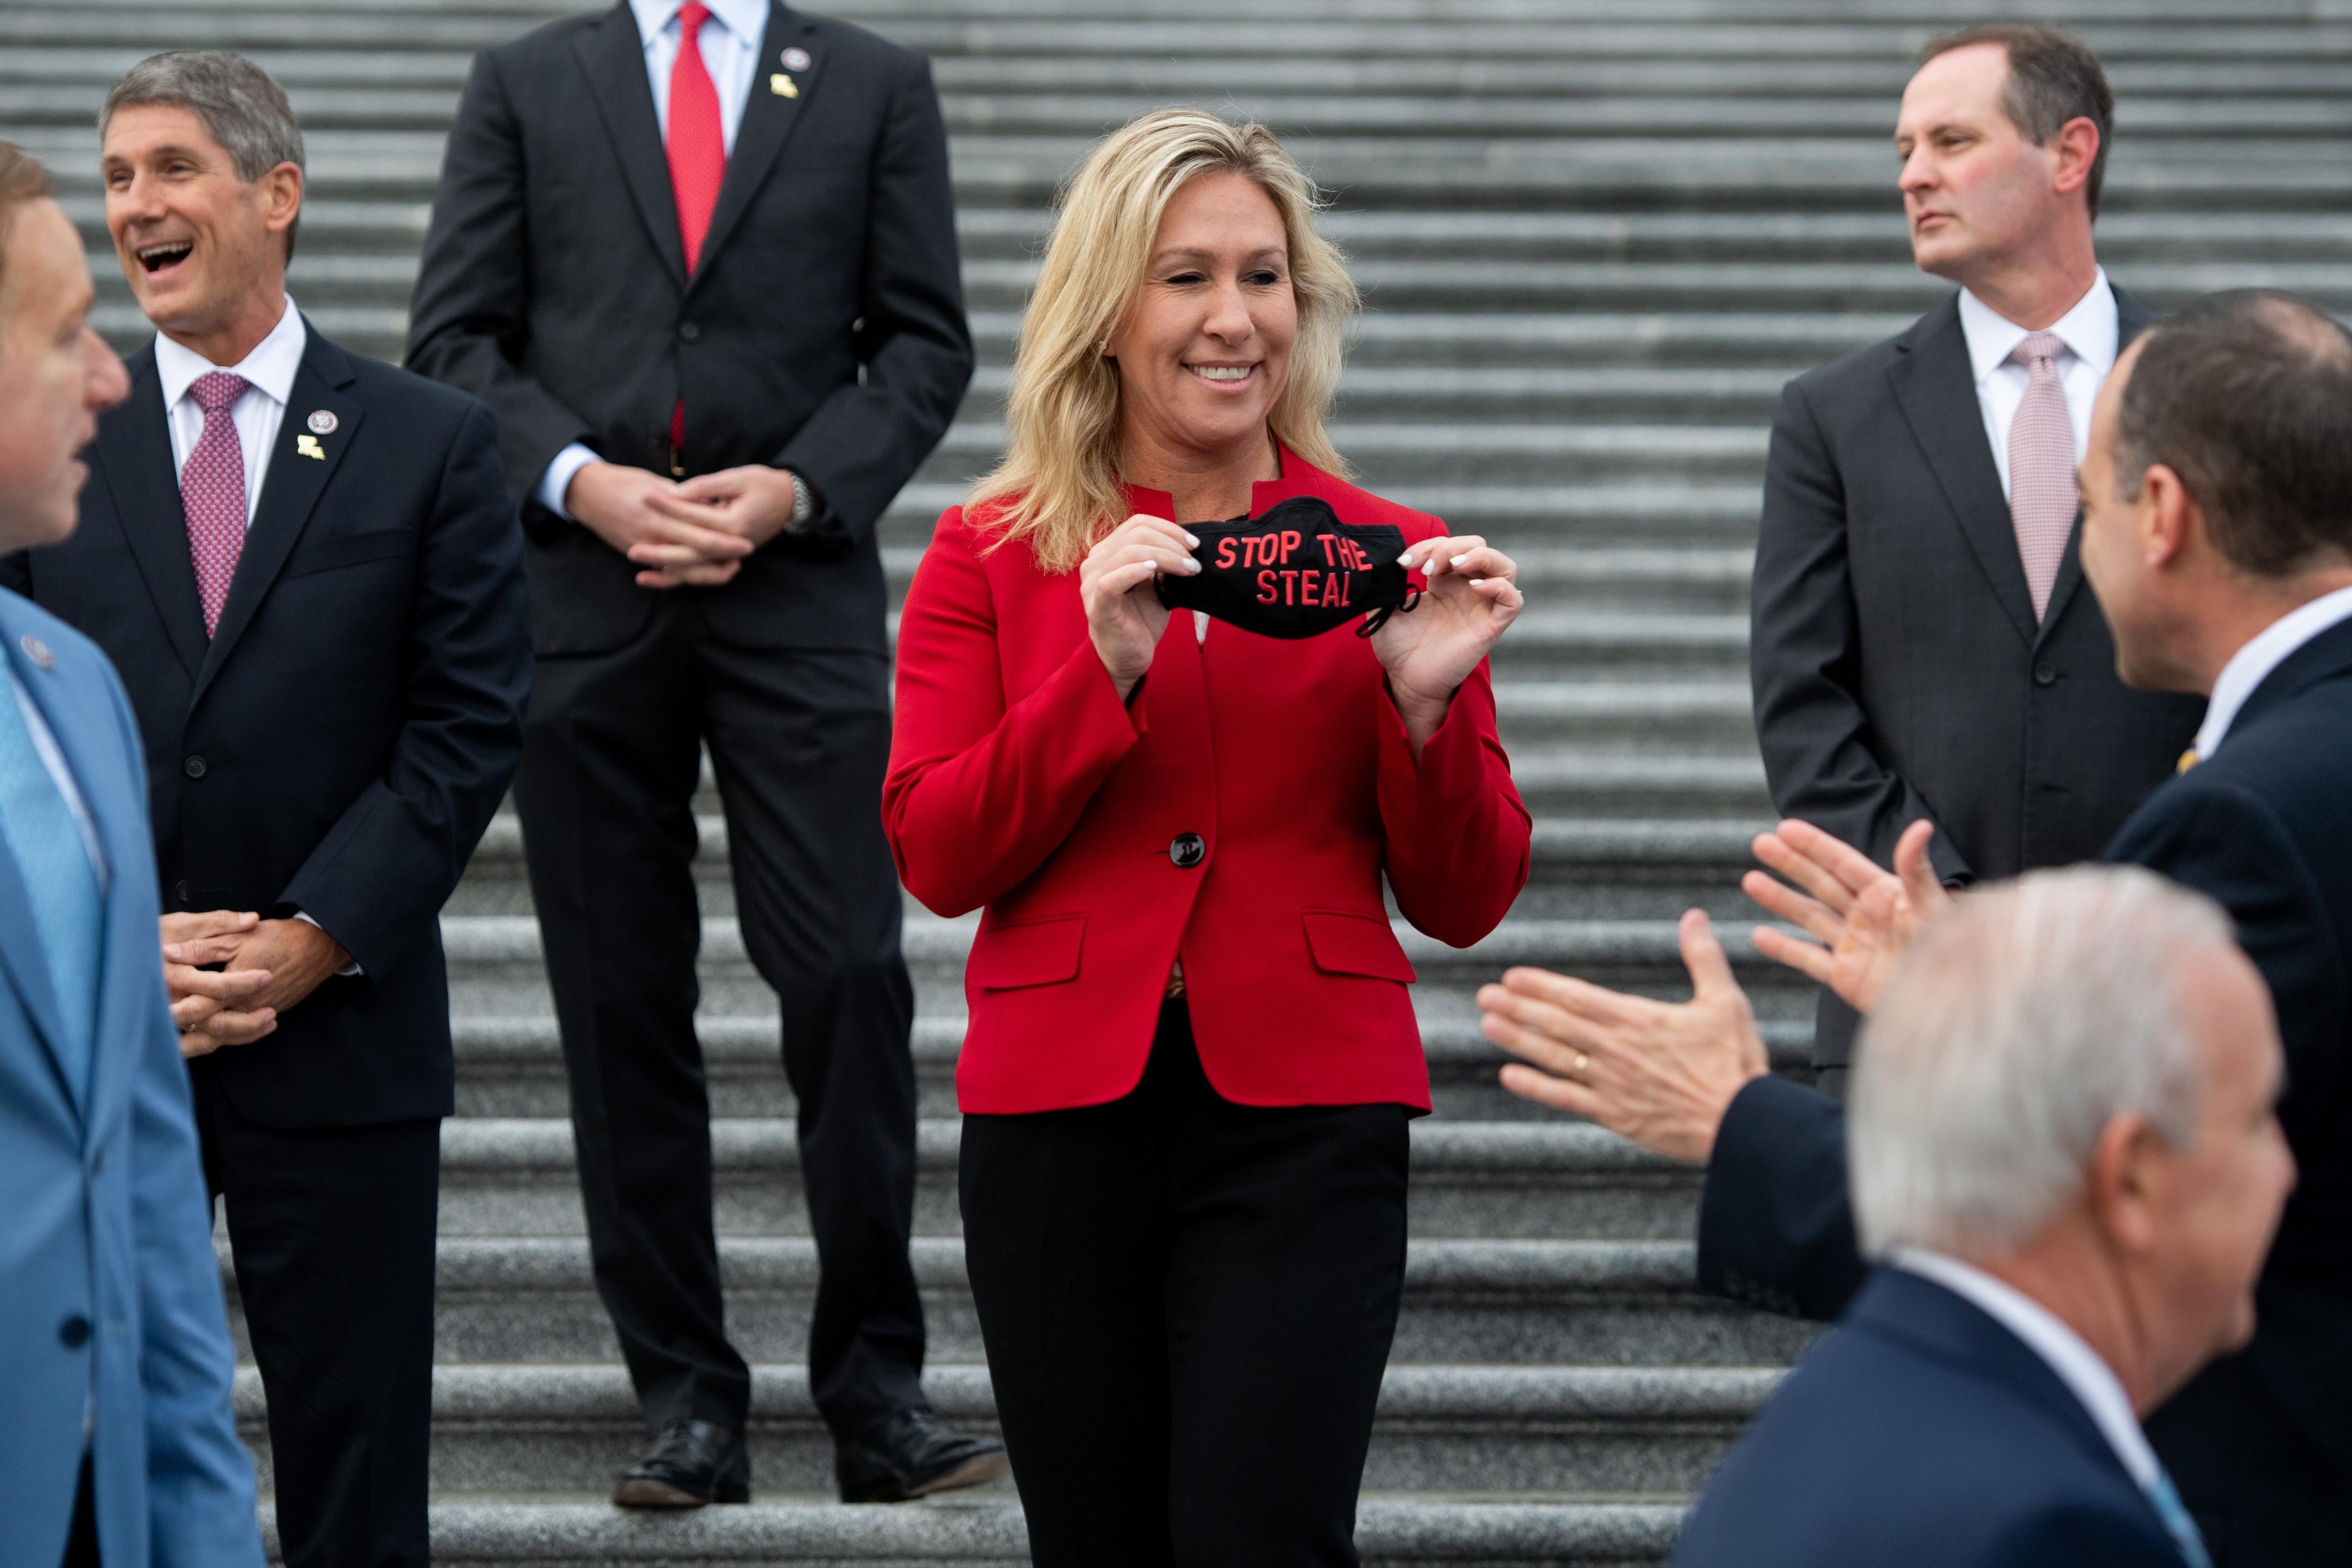 Greene smiles as she holds up a mask that says "Stop the Steal" to supportive fellow Republican freshmen standing around her on the Capitol steps.